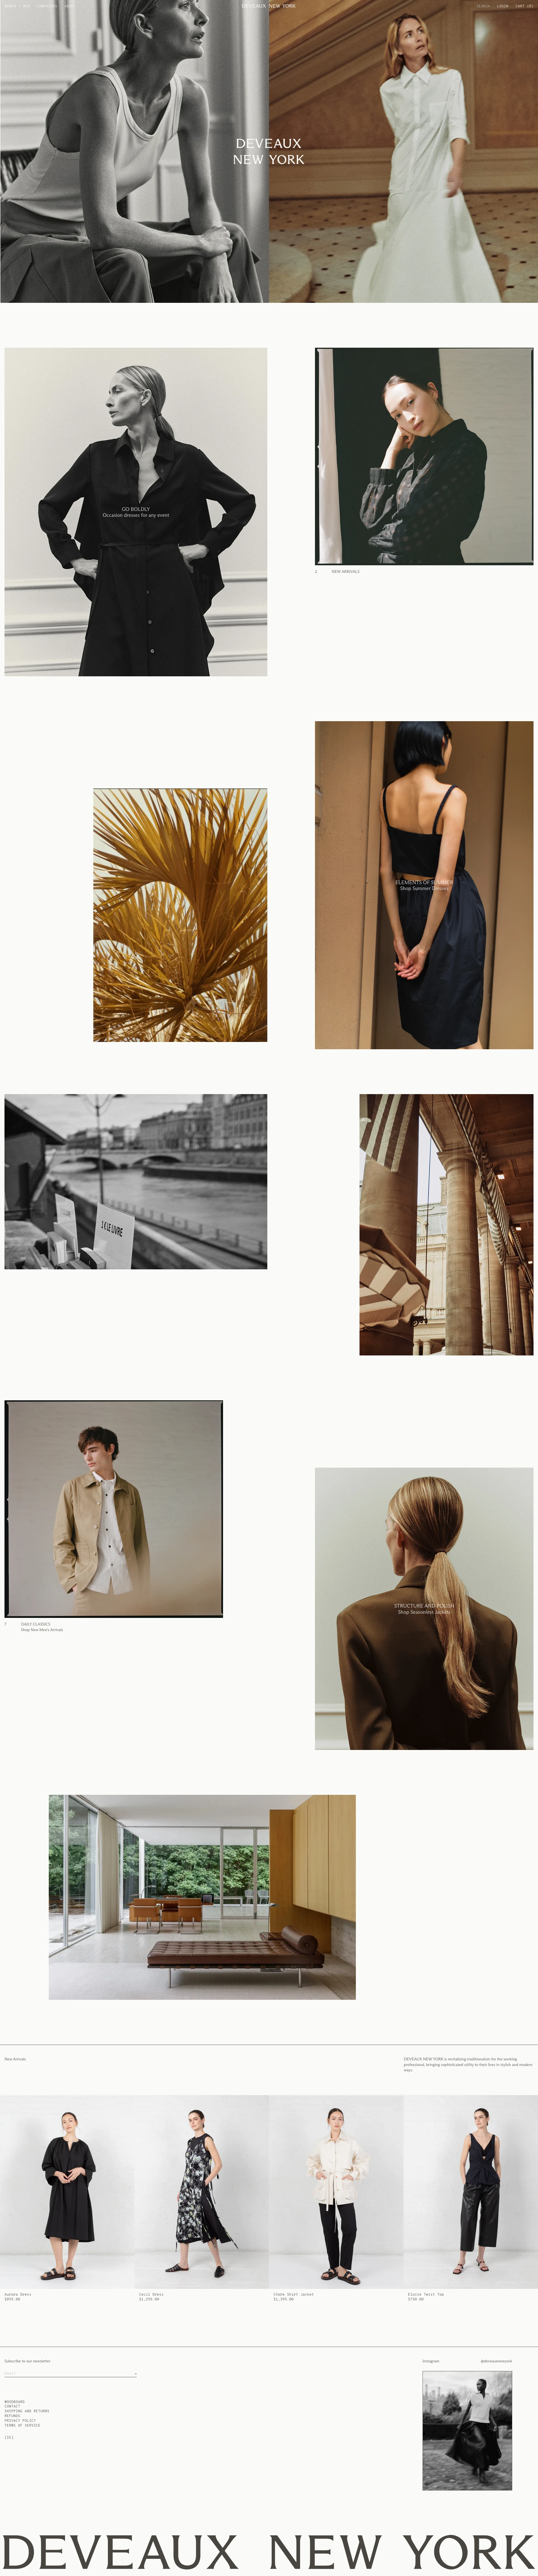 Deveaux New York Landing Page Example: Deveaux is a ready-to-wear collection based in New York City. The brand creates utilitarian staples with sensible and timeless construction. Shop ready-to-wear and accessories collections for men and women.